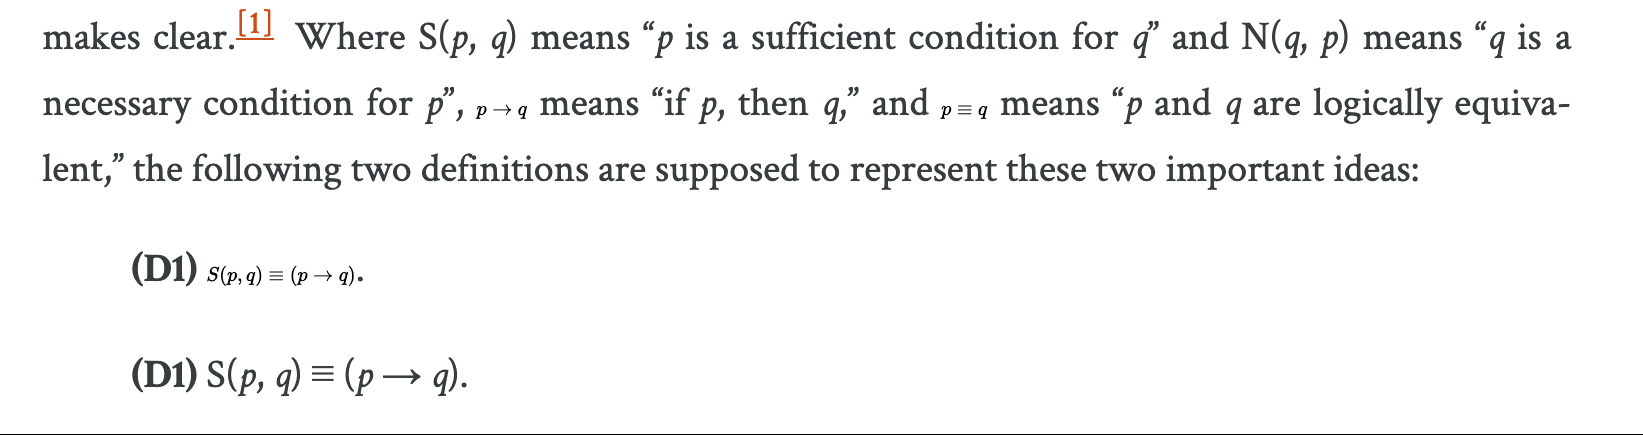 a paragraph of text with some text in LaTeX and some not; the former is smaller than the latter.